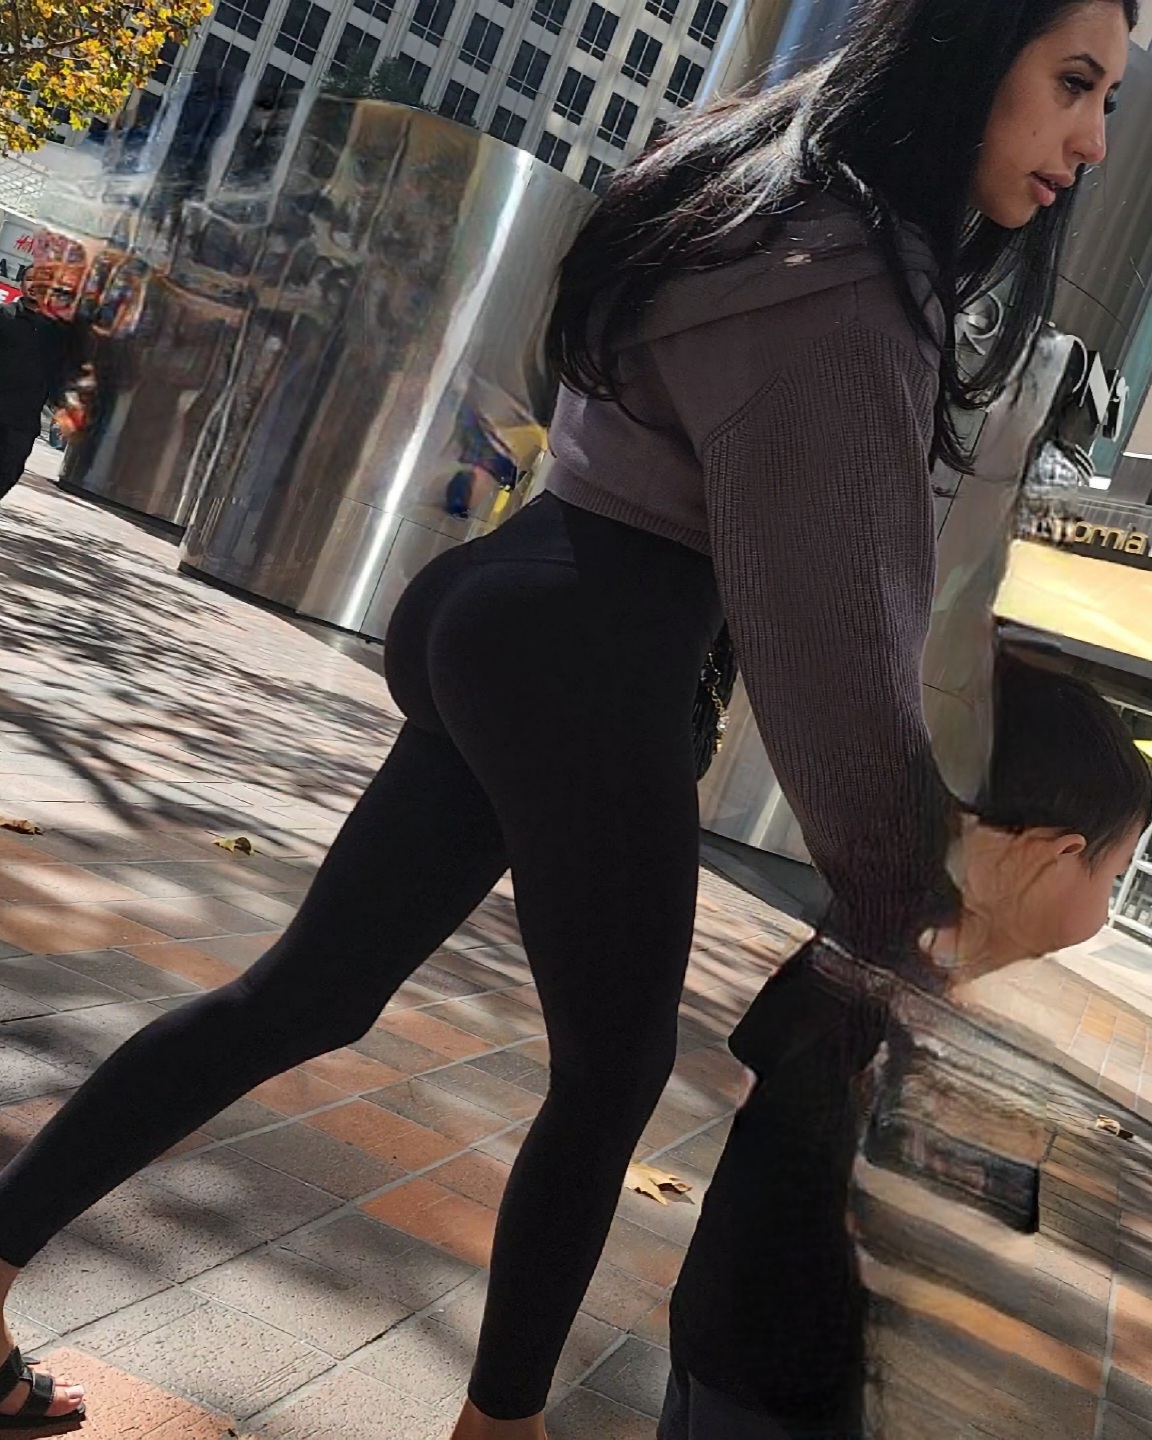 Almost missed out. Perfect Latina BBL Lululemon MILF - Spandex